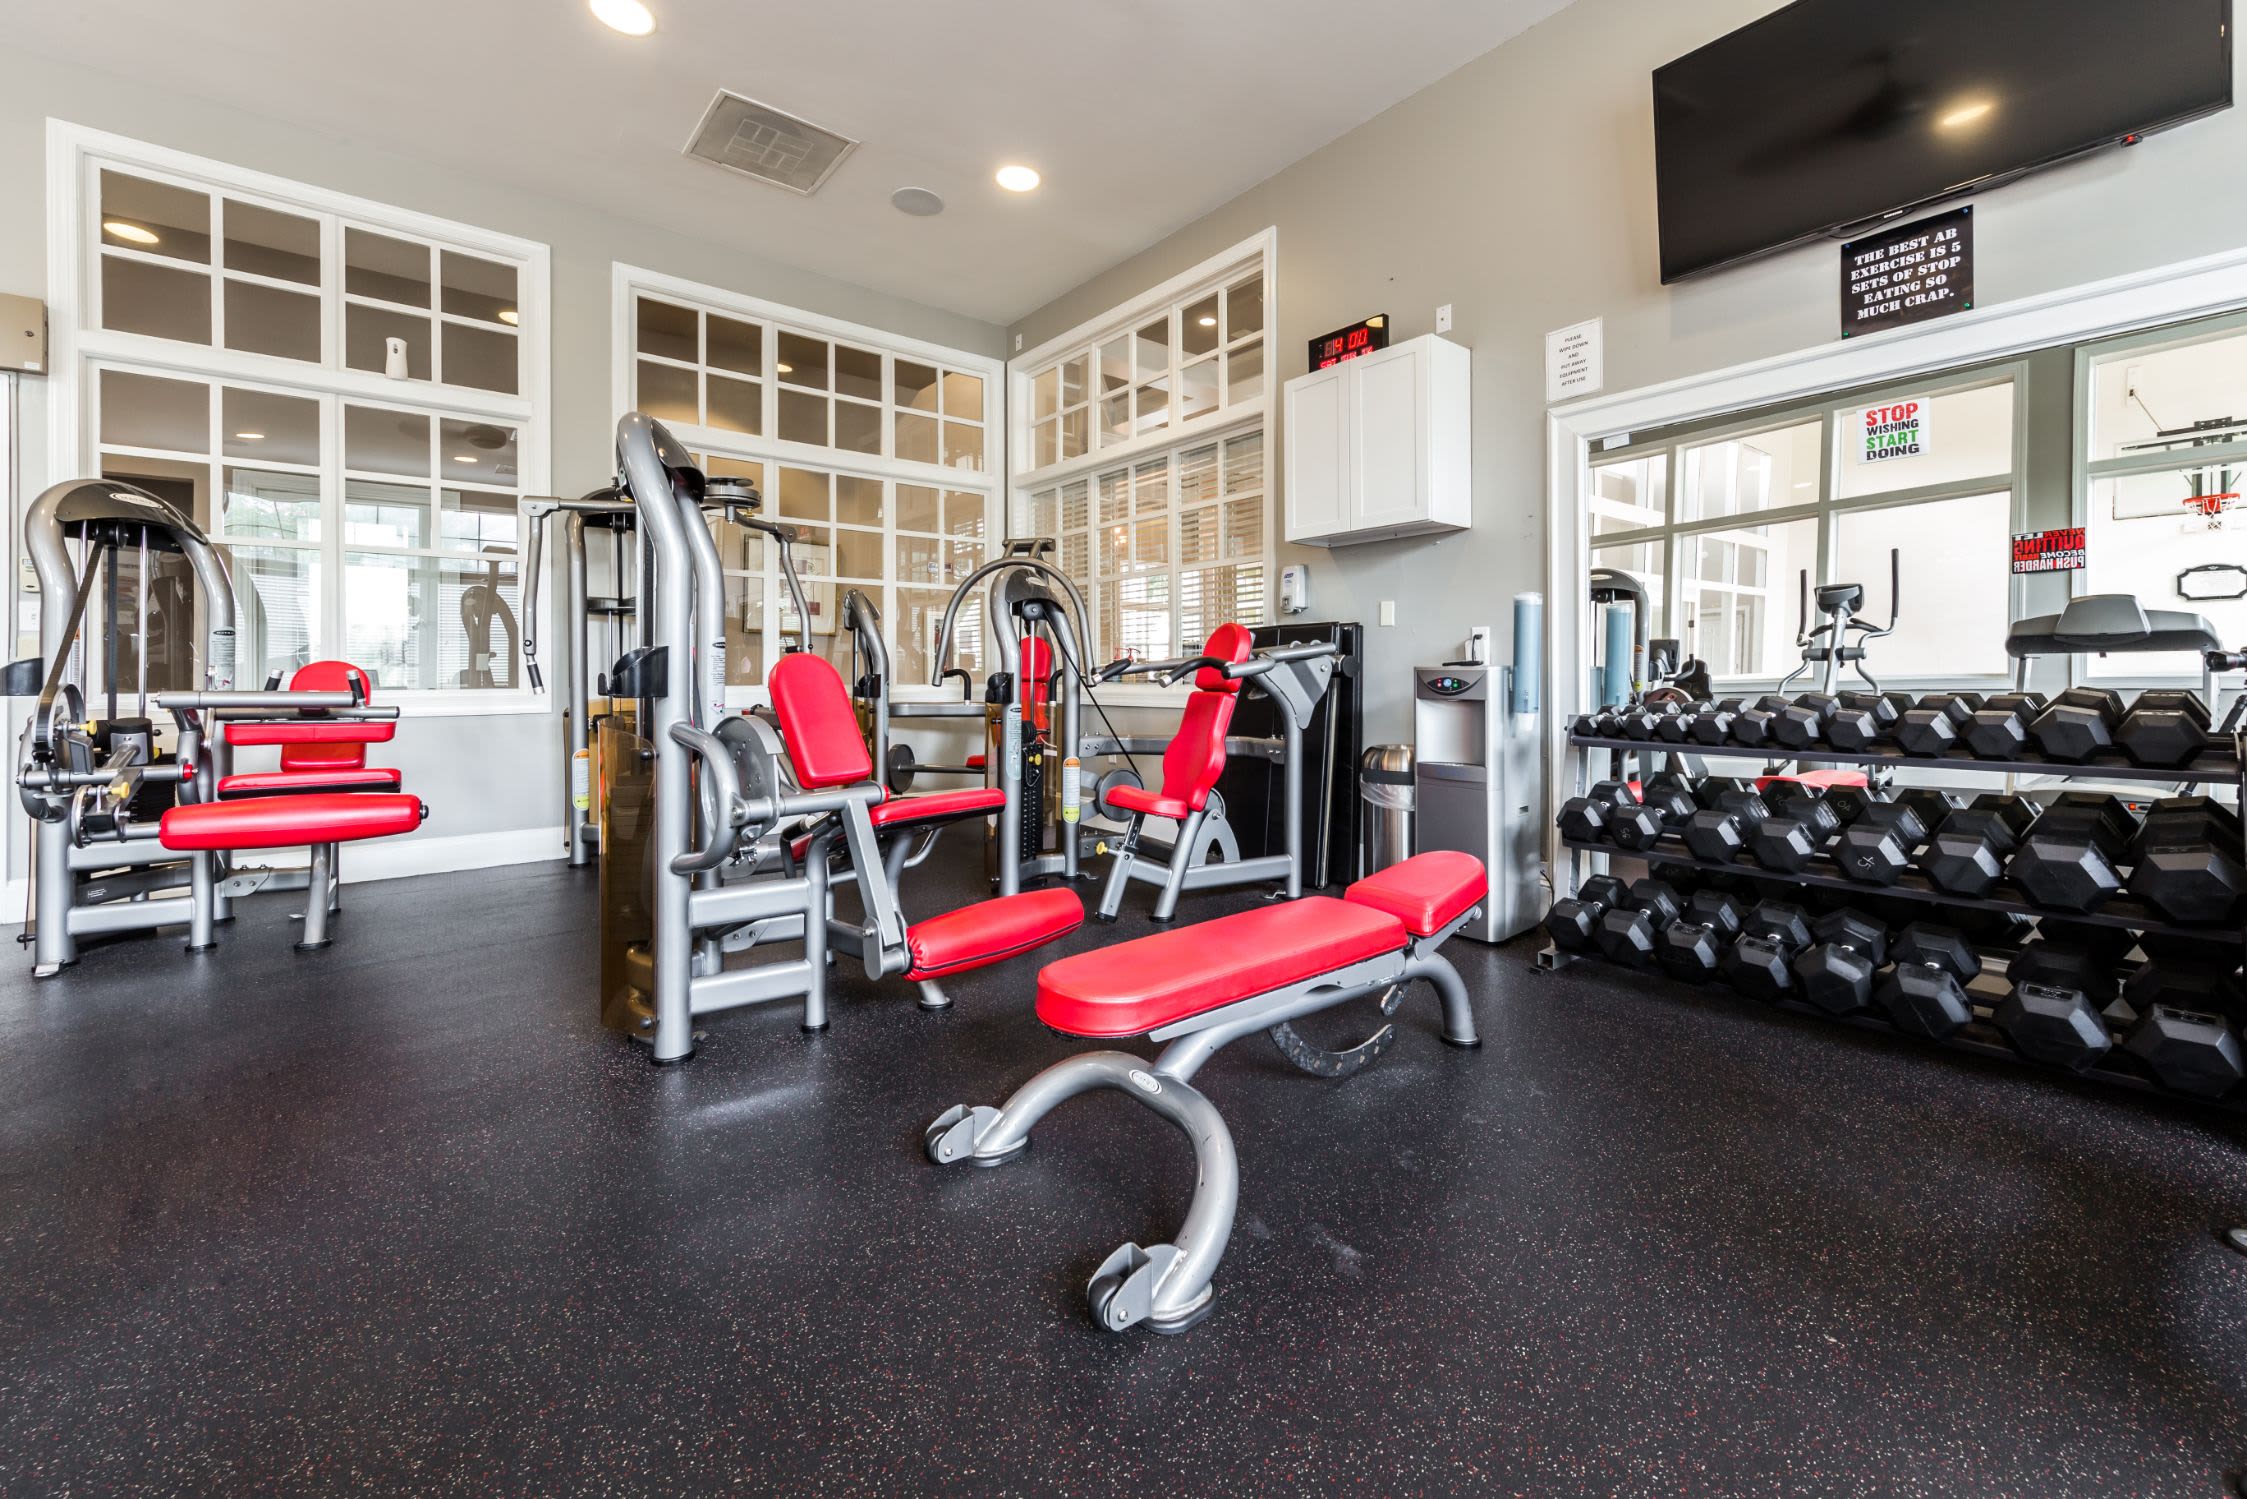 Fitness center at The Preserve at Ballantyne Commons in Charlotte, North Carolina